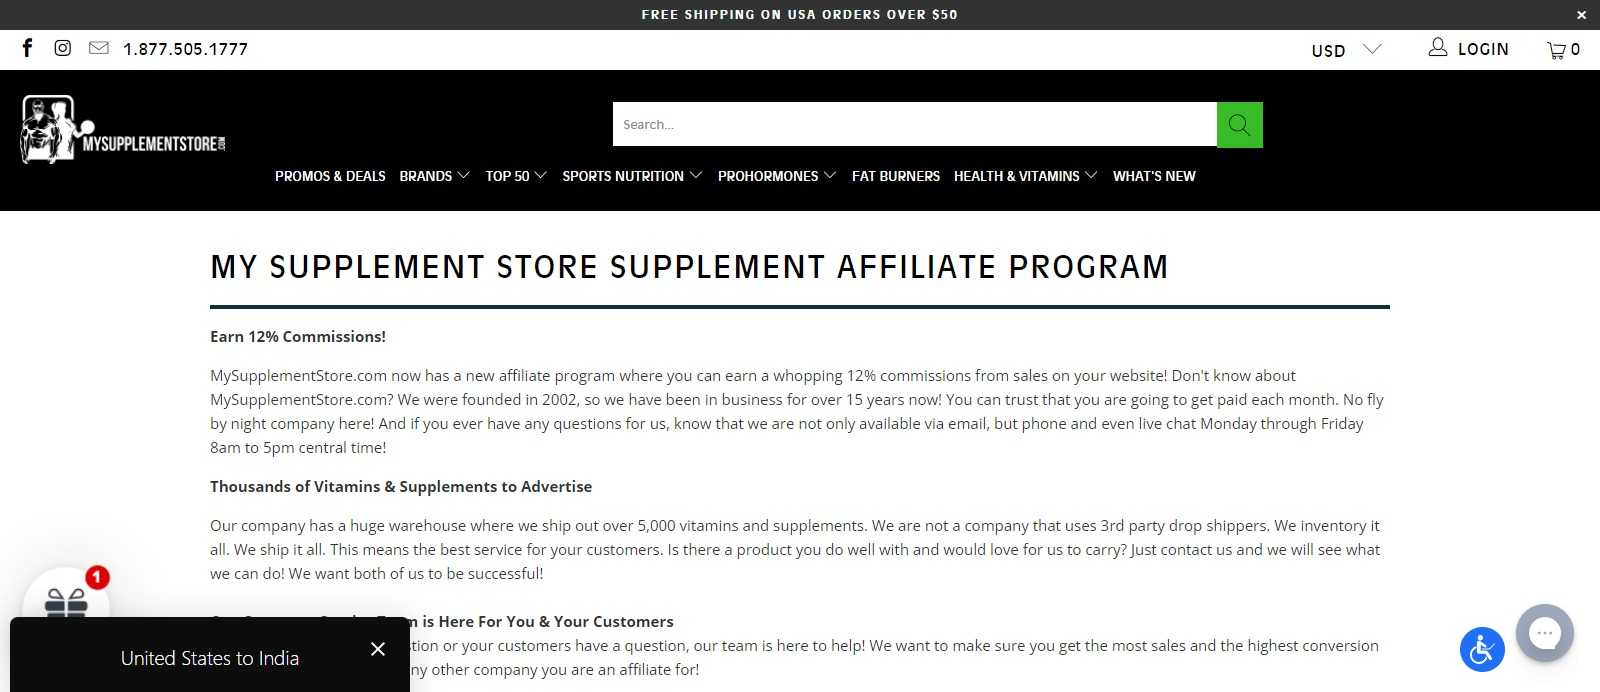 My Supplement Store Affiliate Program Review: 12% Commission on Each sale